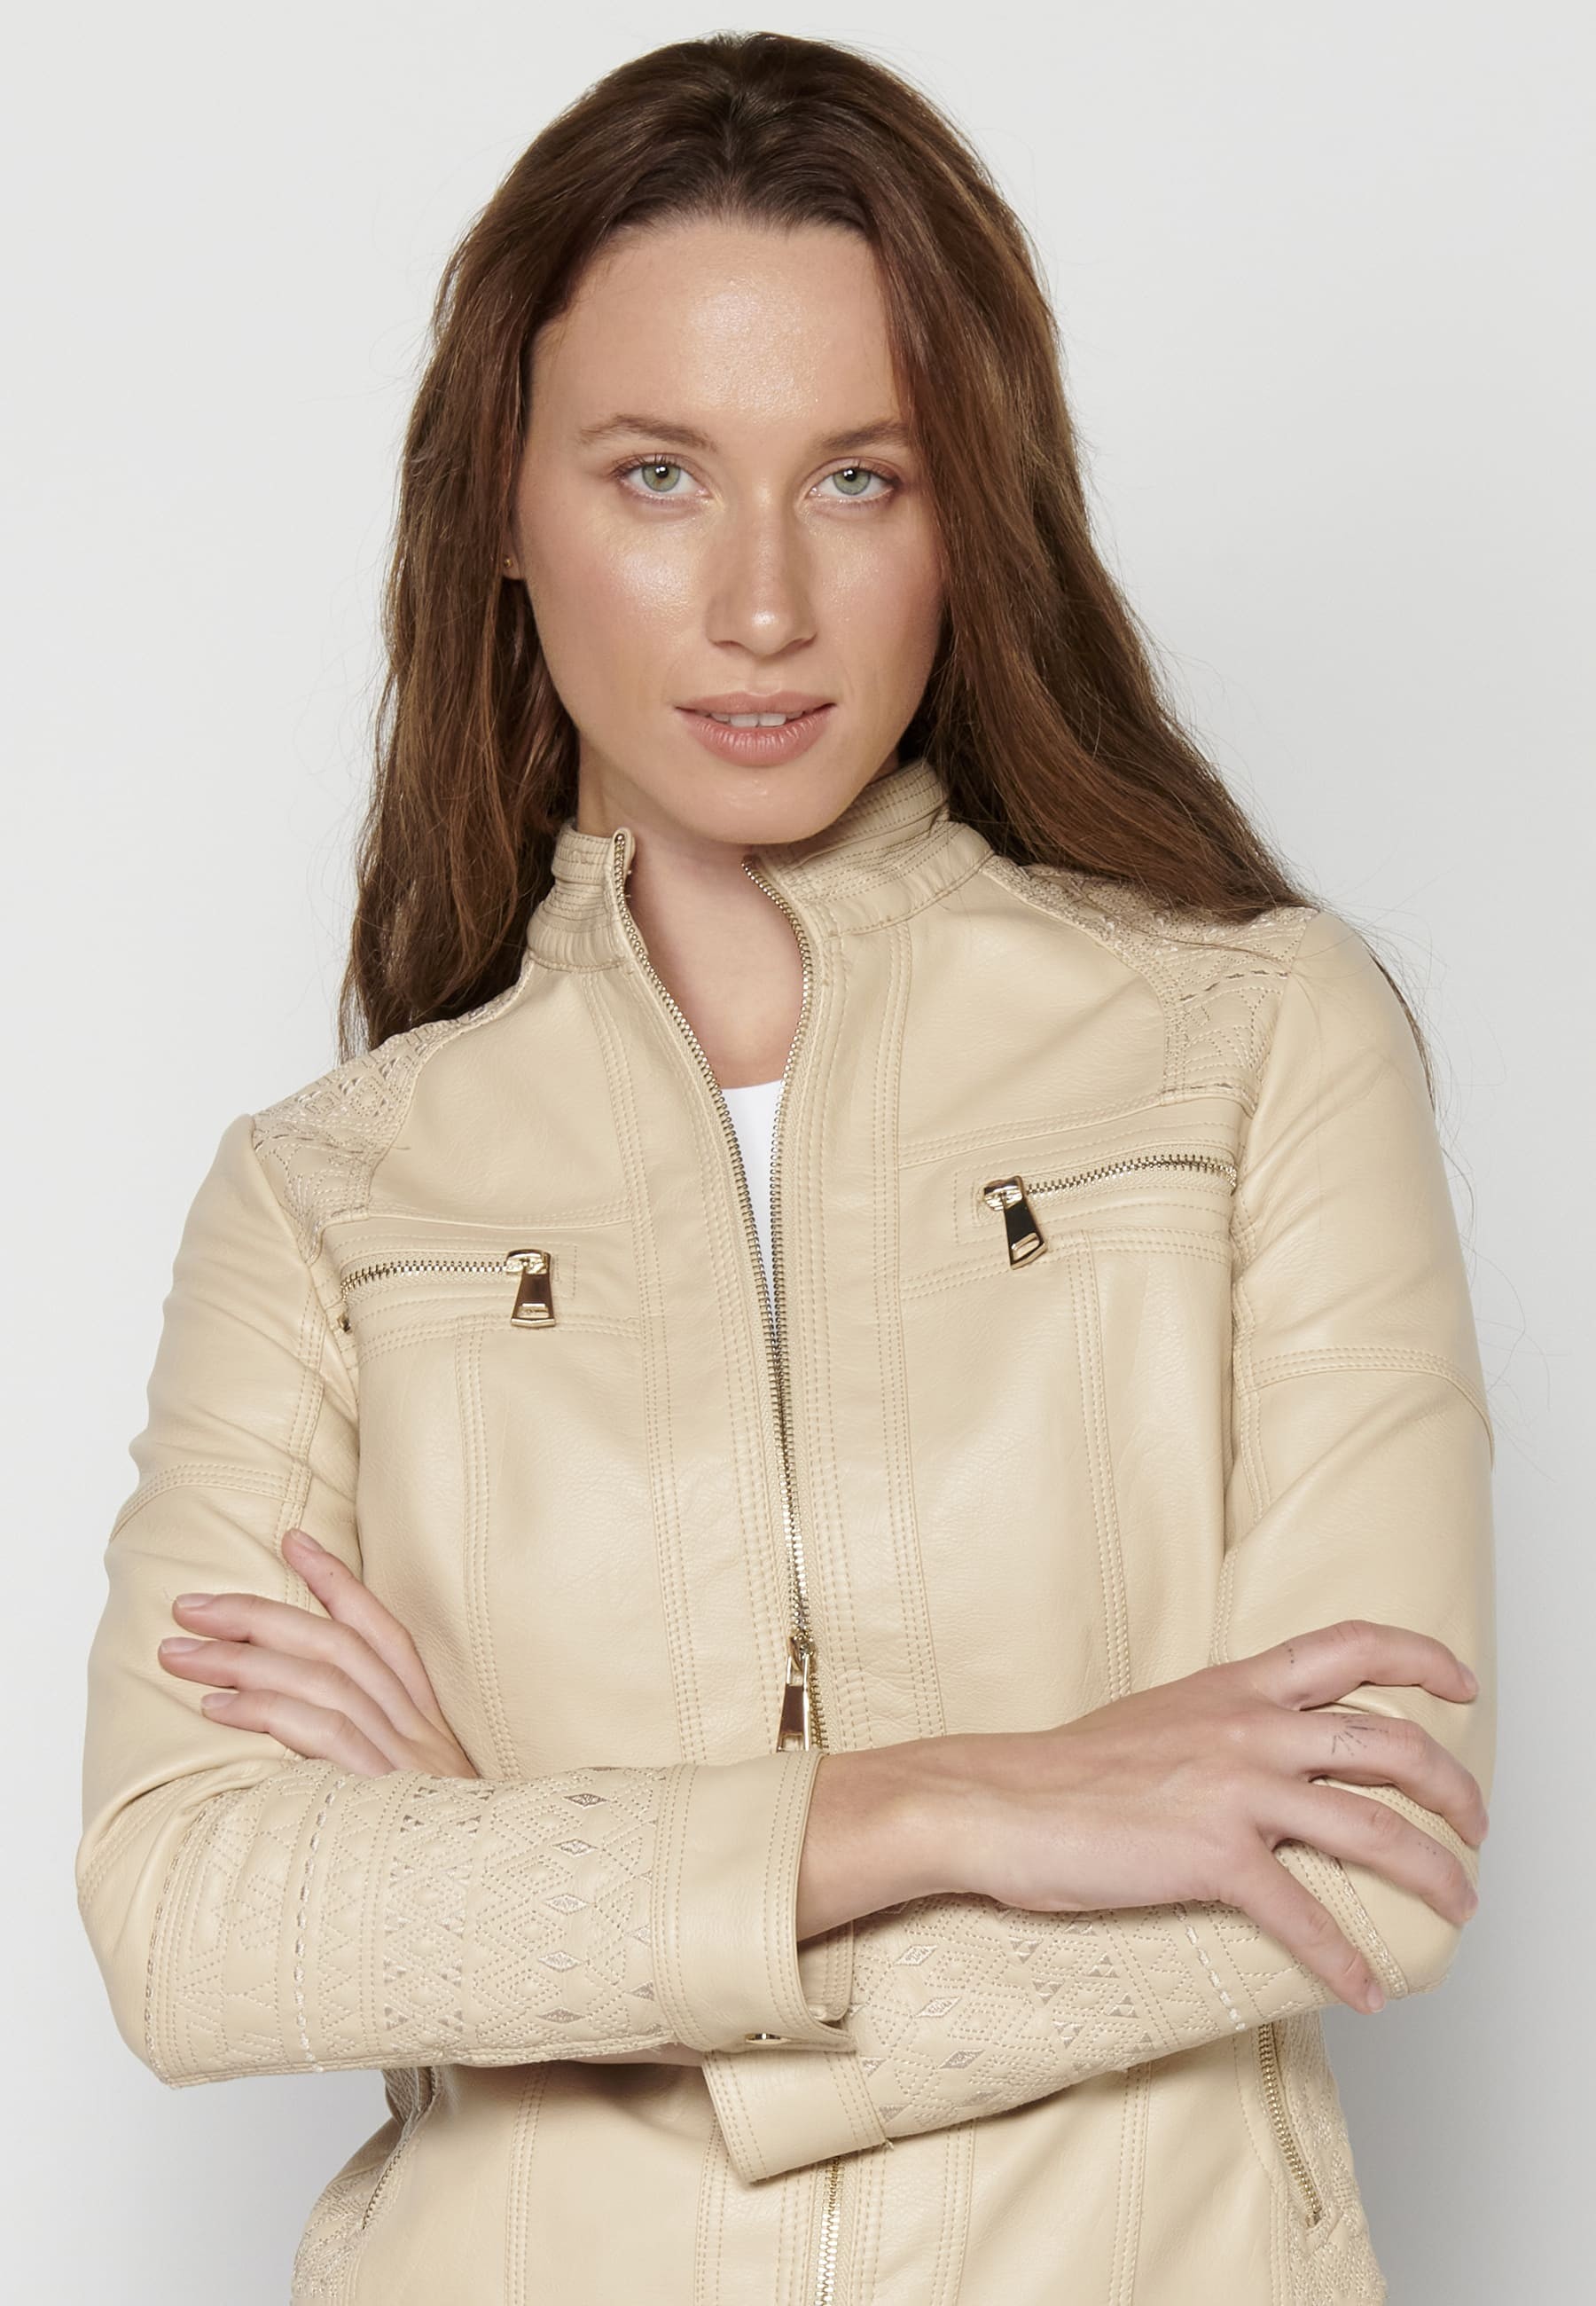 Synthetic leather jacket with details on shoulders Ecru color for Woman